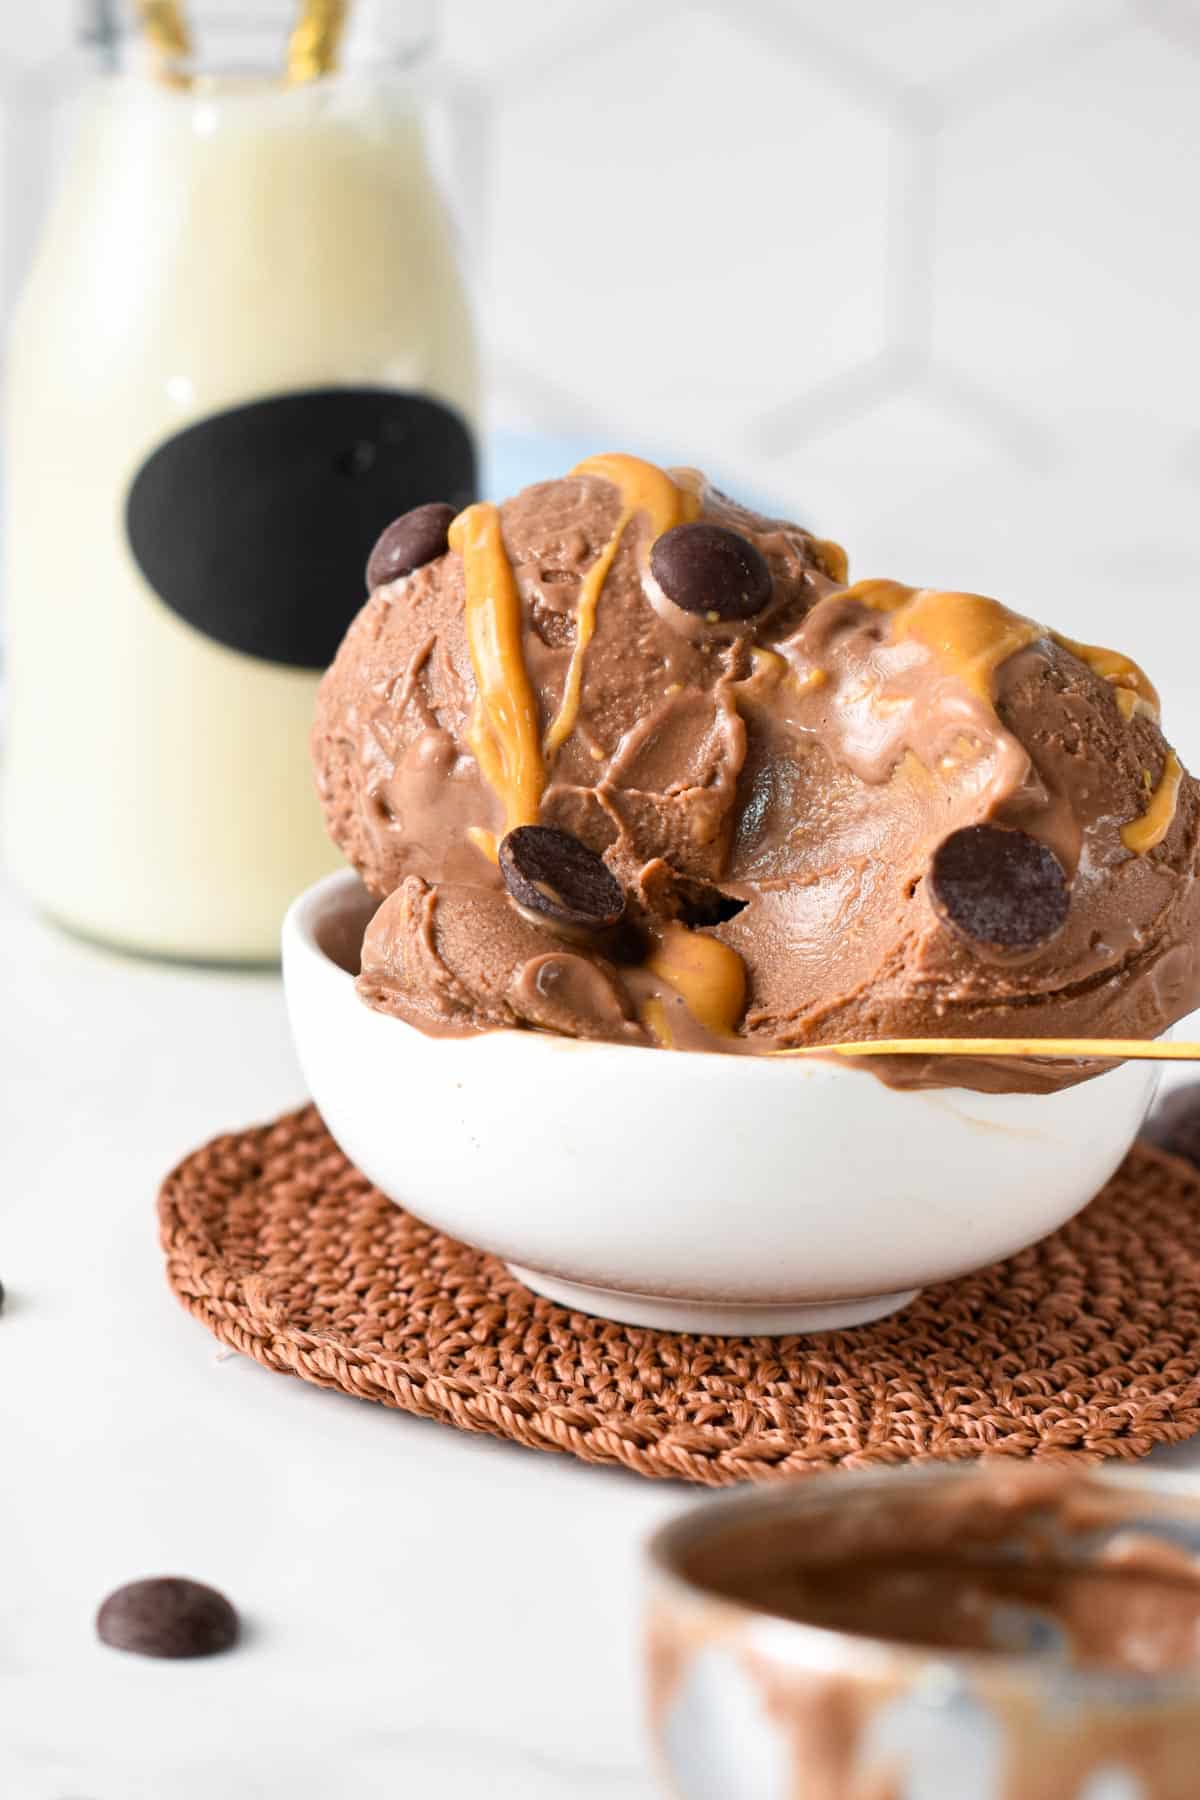 Plant-based and Dairy-based Protein Ice Creams for the Ninja CREAMi